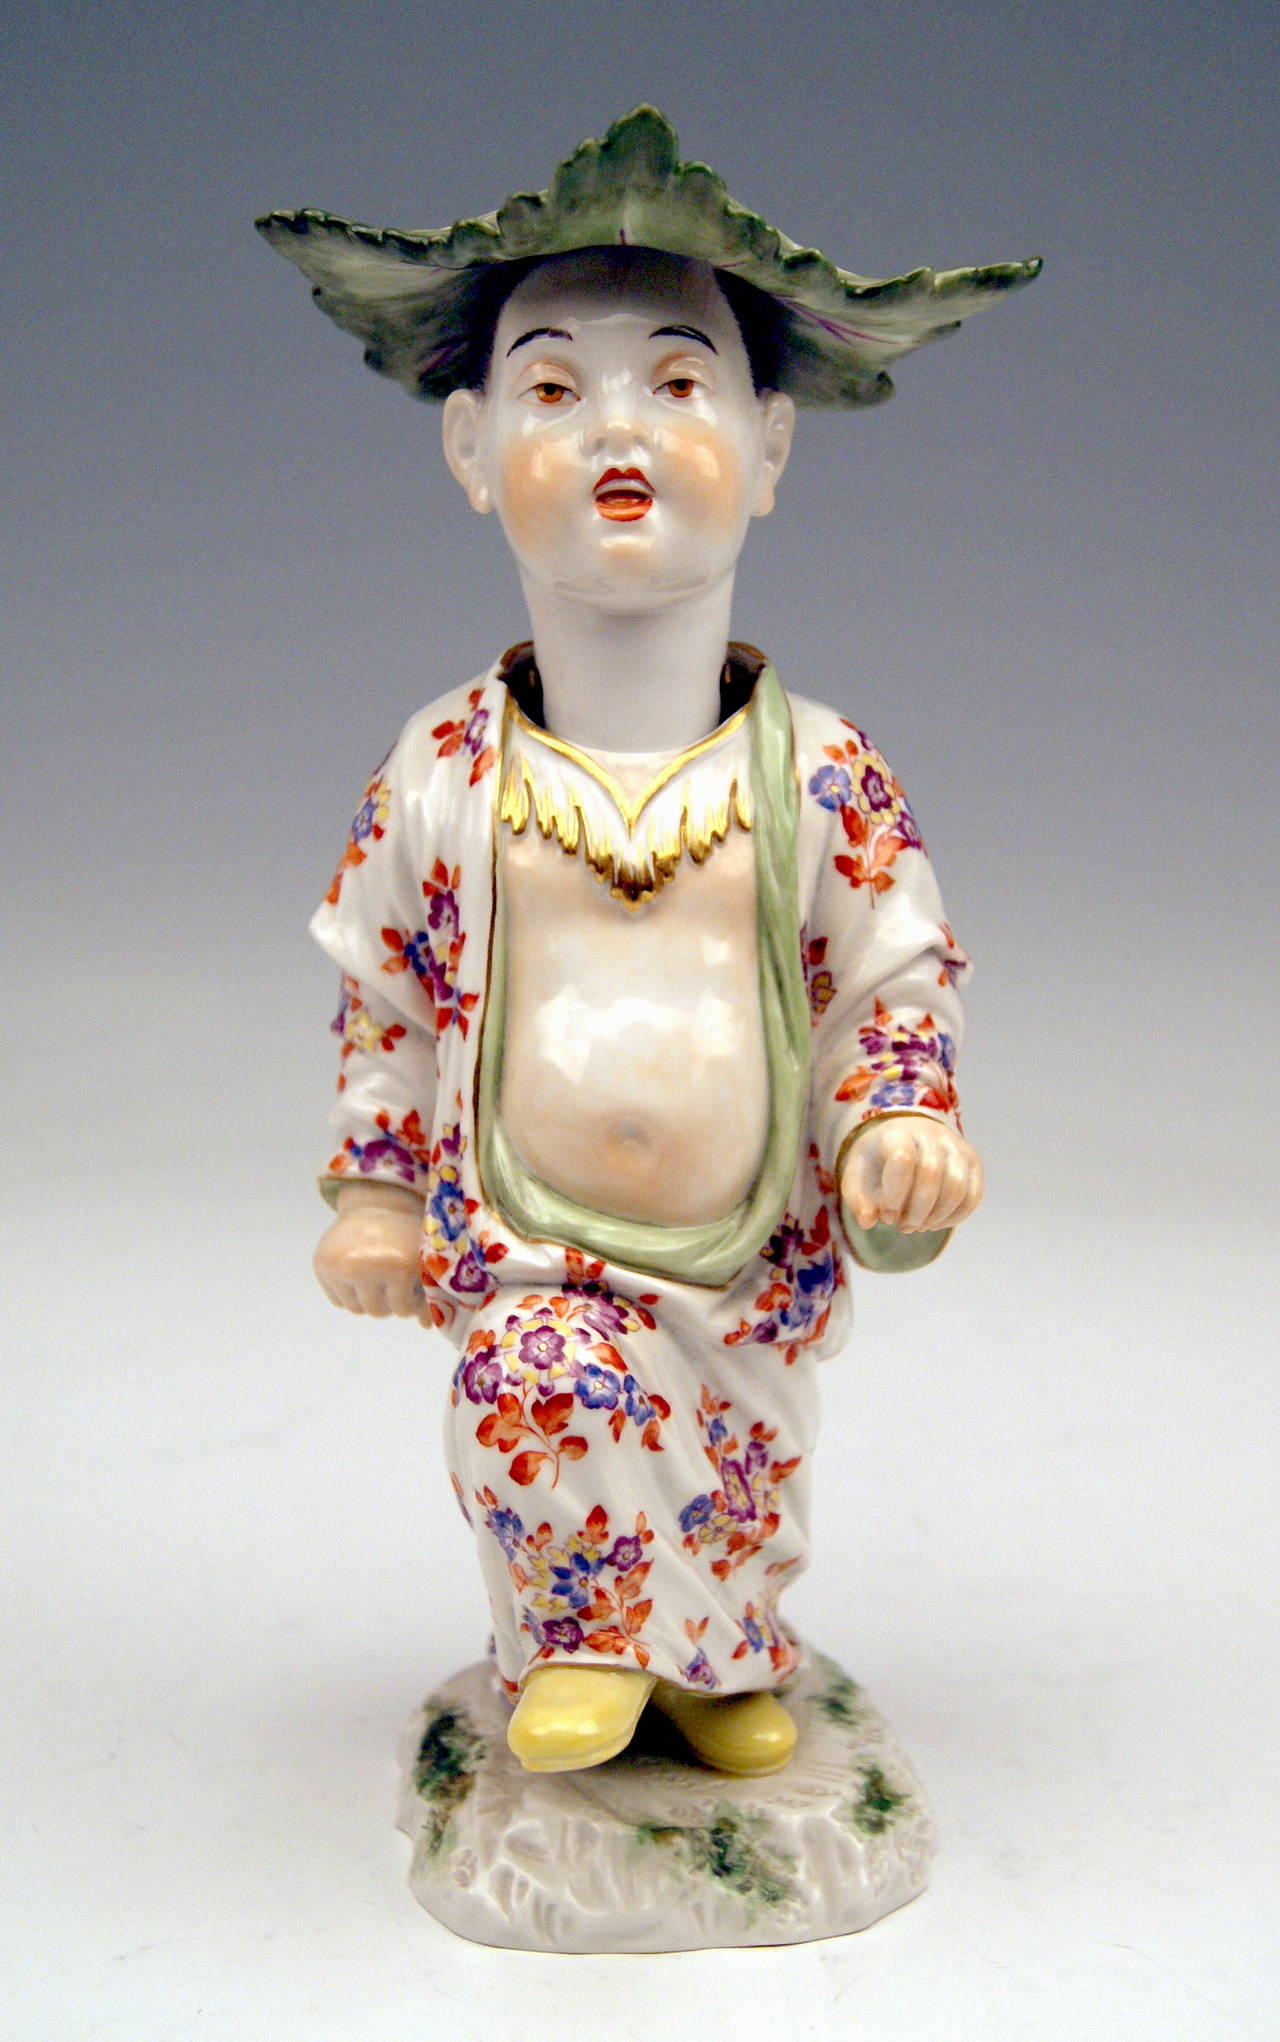 Meissen gorgeous as well as rarest figurine:  
Chinese Boy with Hat made of Cabbages' Leaves.
DATING:            made 20th century 
MATERIAL:        white porcelain, glossy finish, finest painting 
TECHNIQUE:     handmade